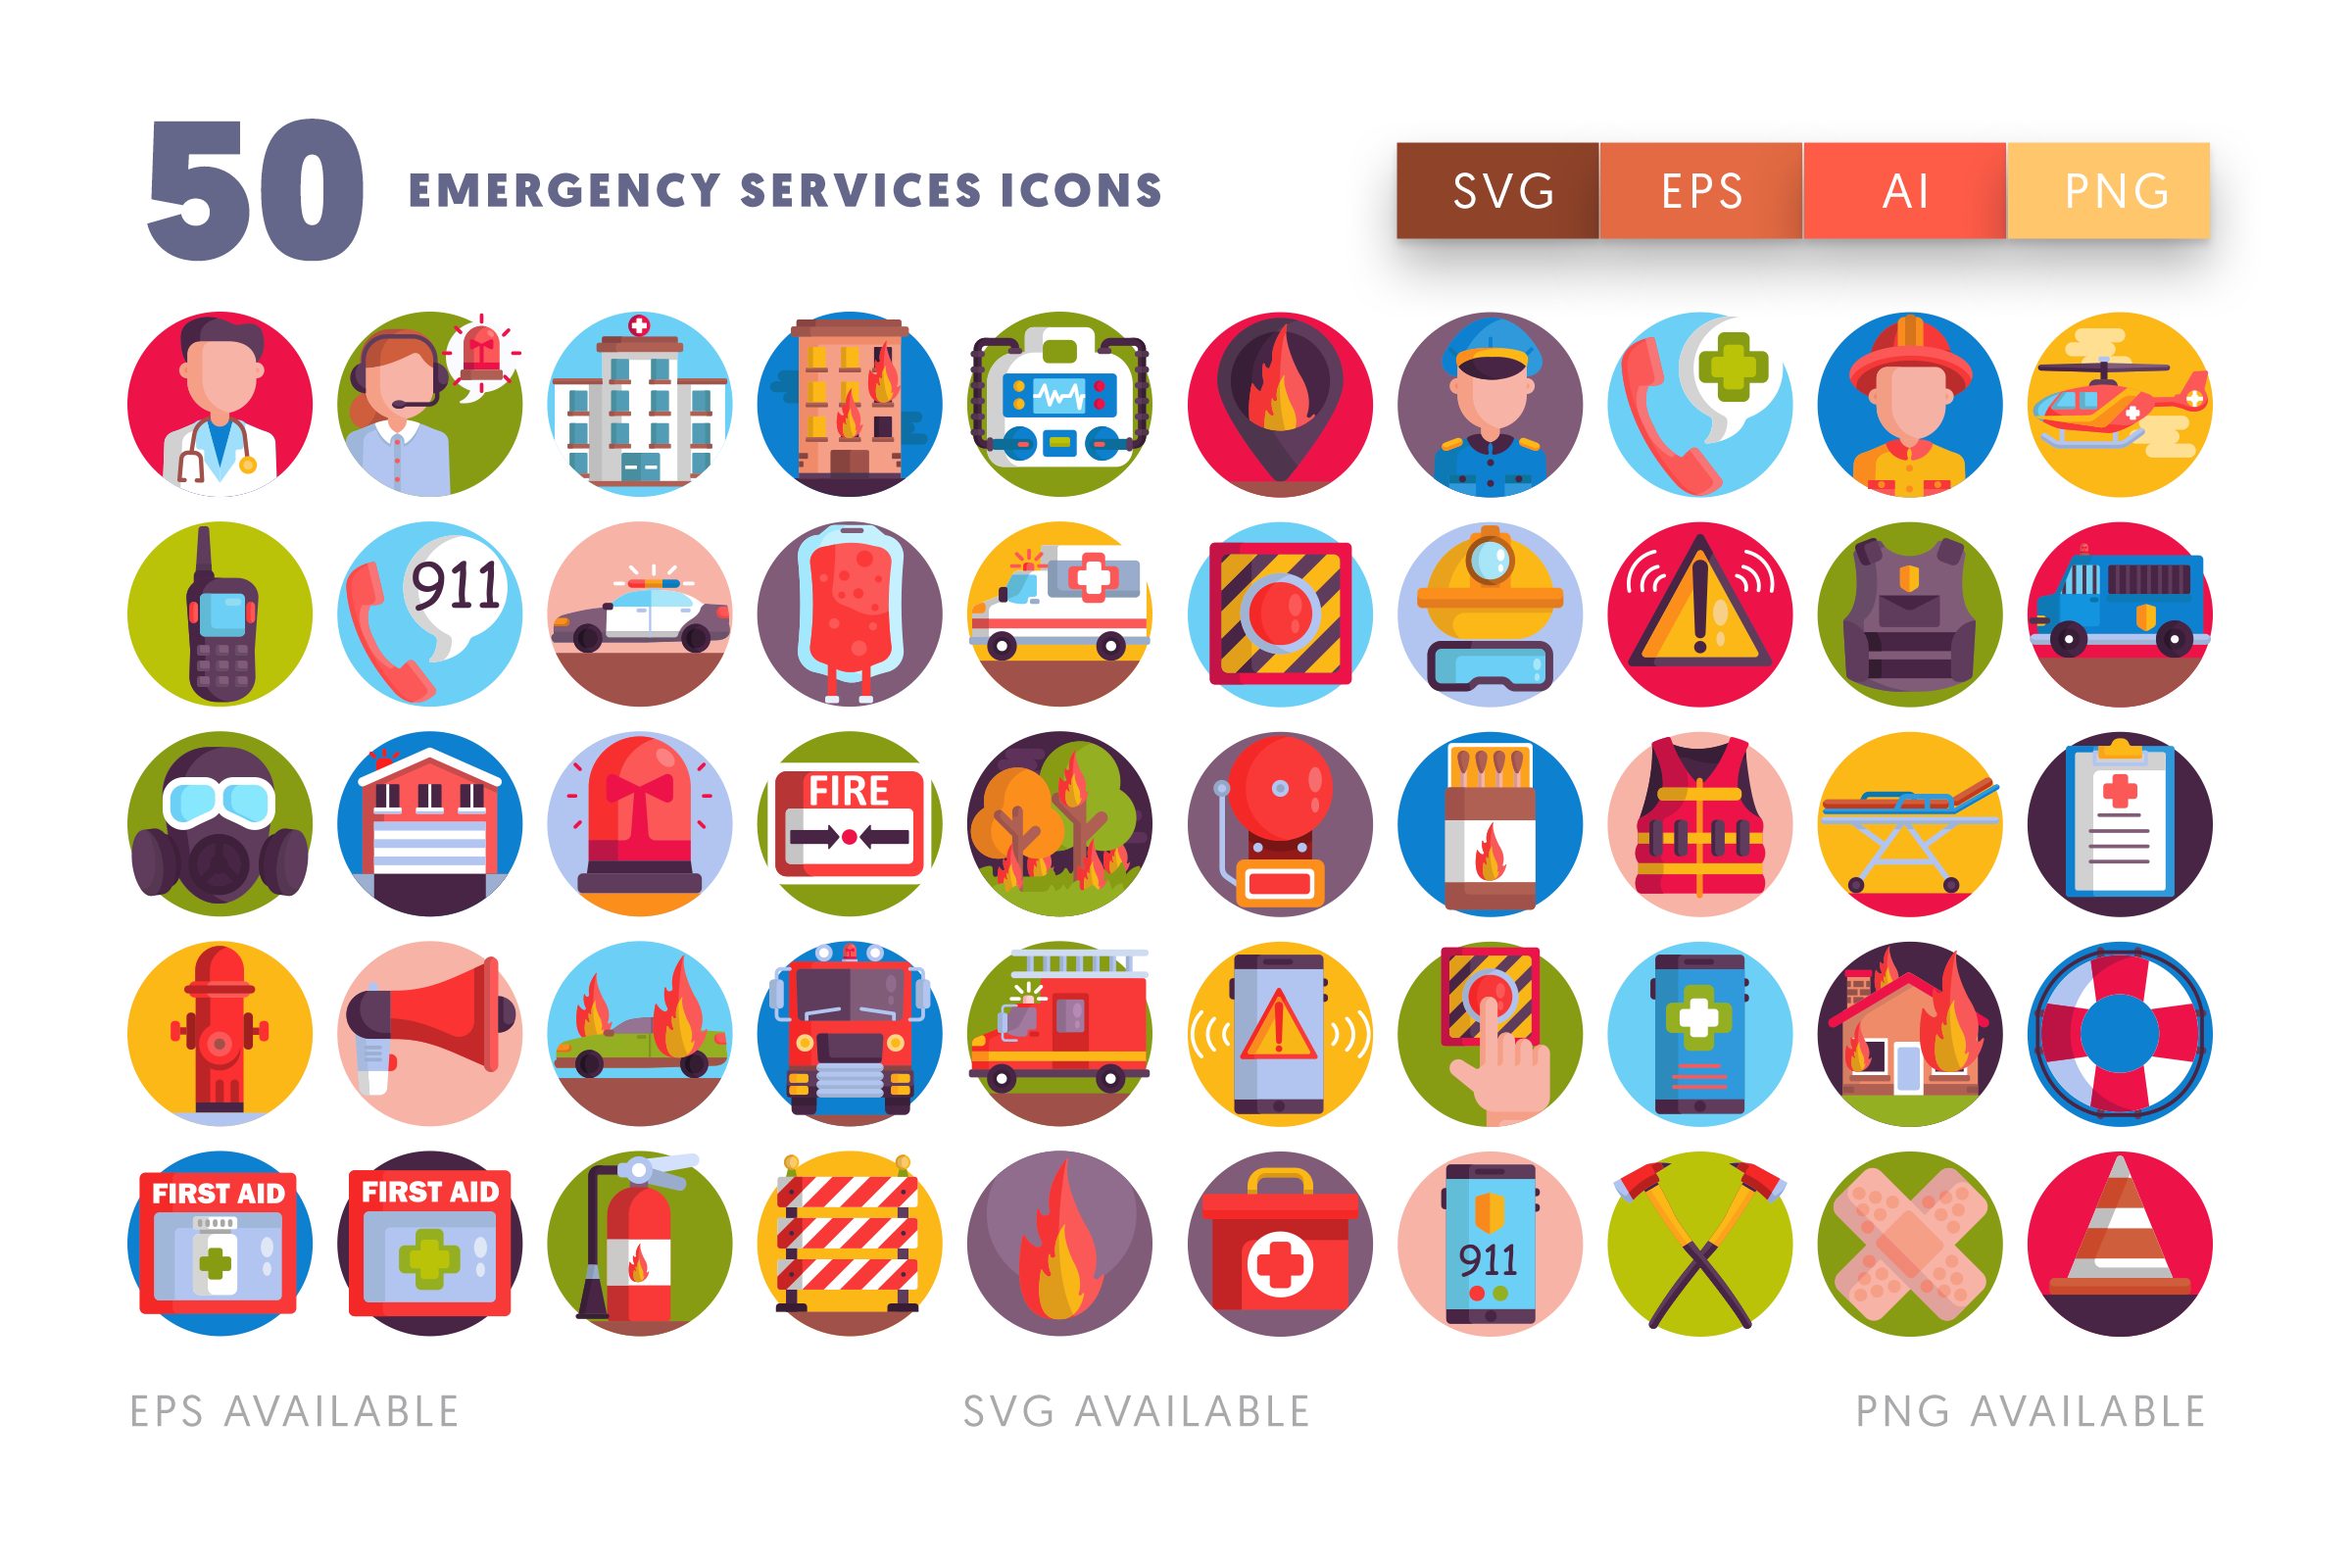 Emergency Service icons png/svg/eps